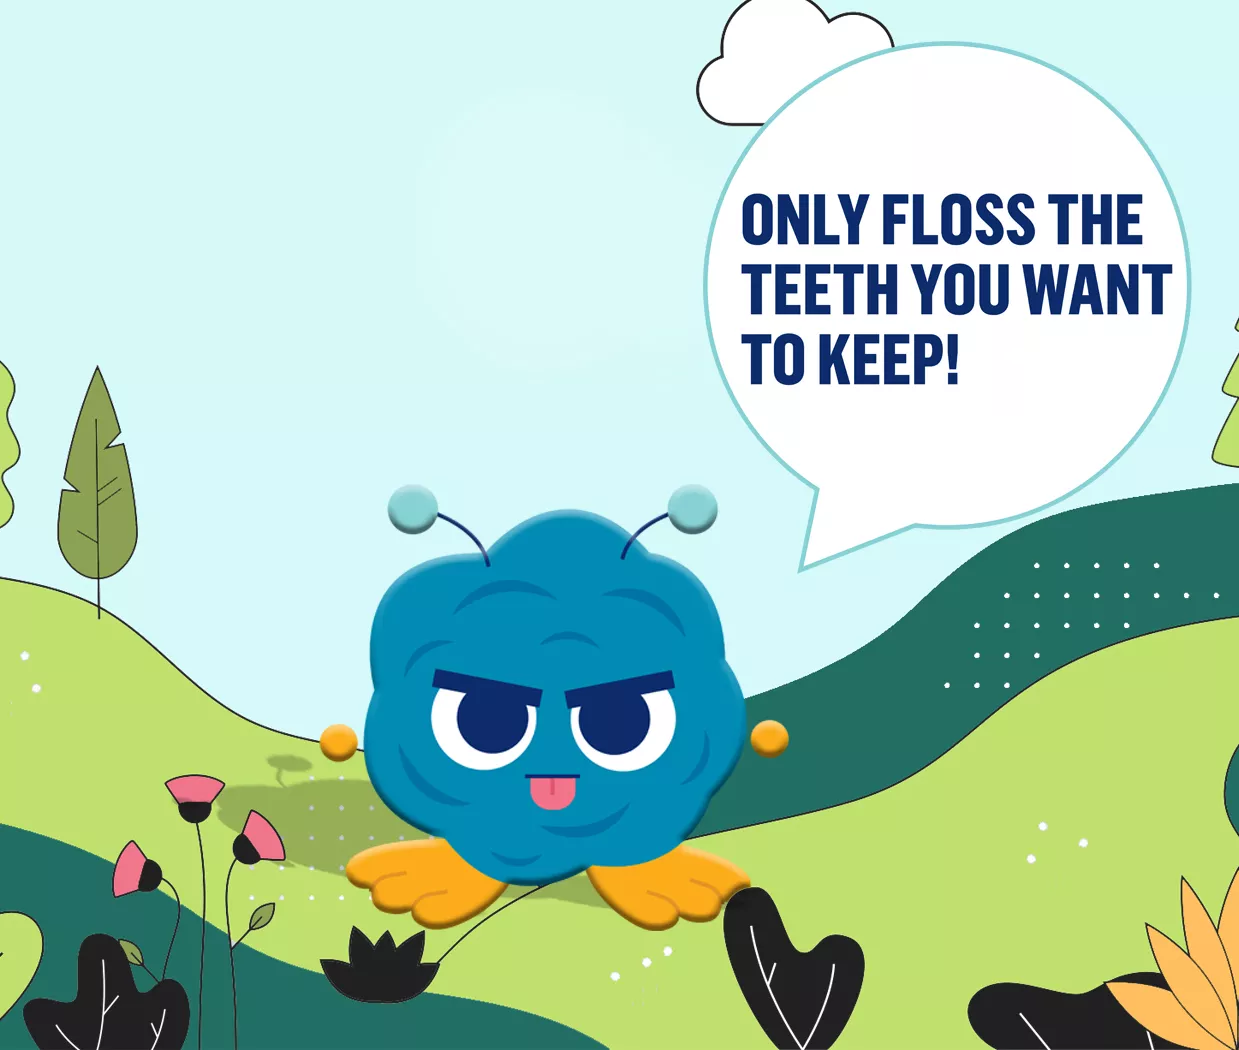 Only floss the teeth you want to keep!